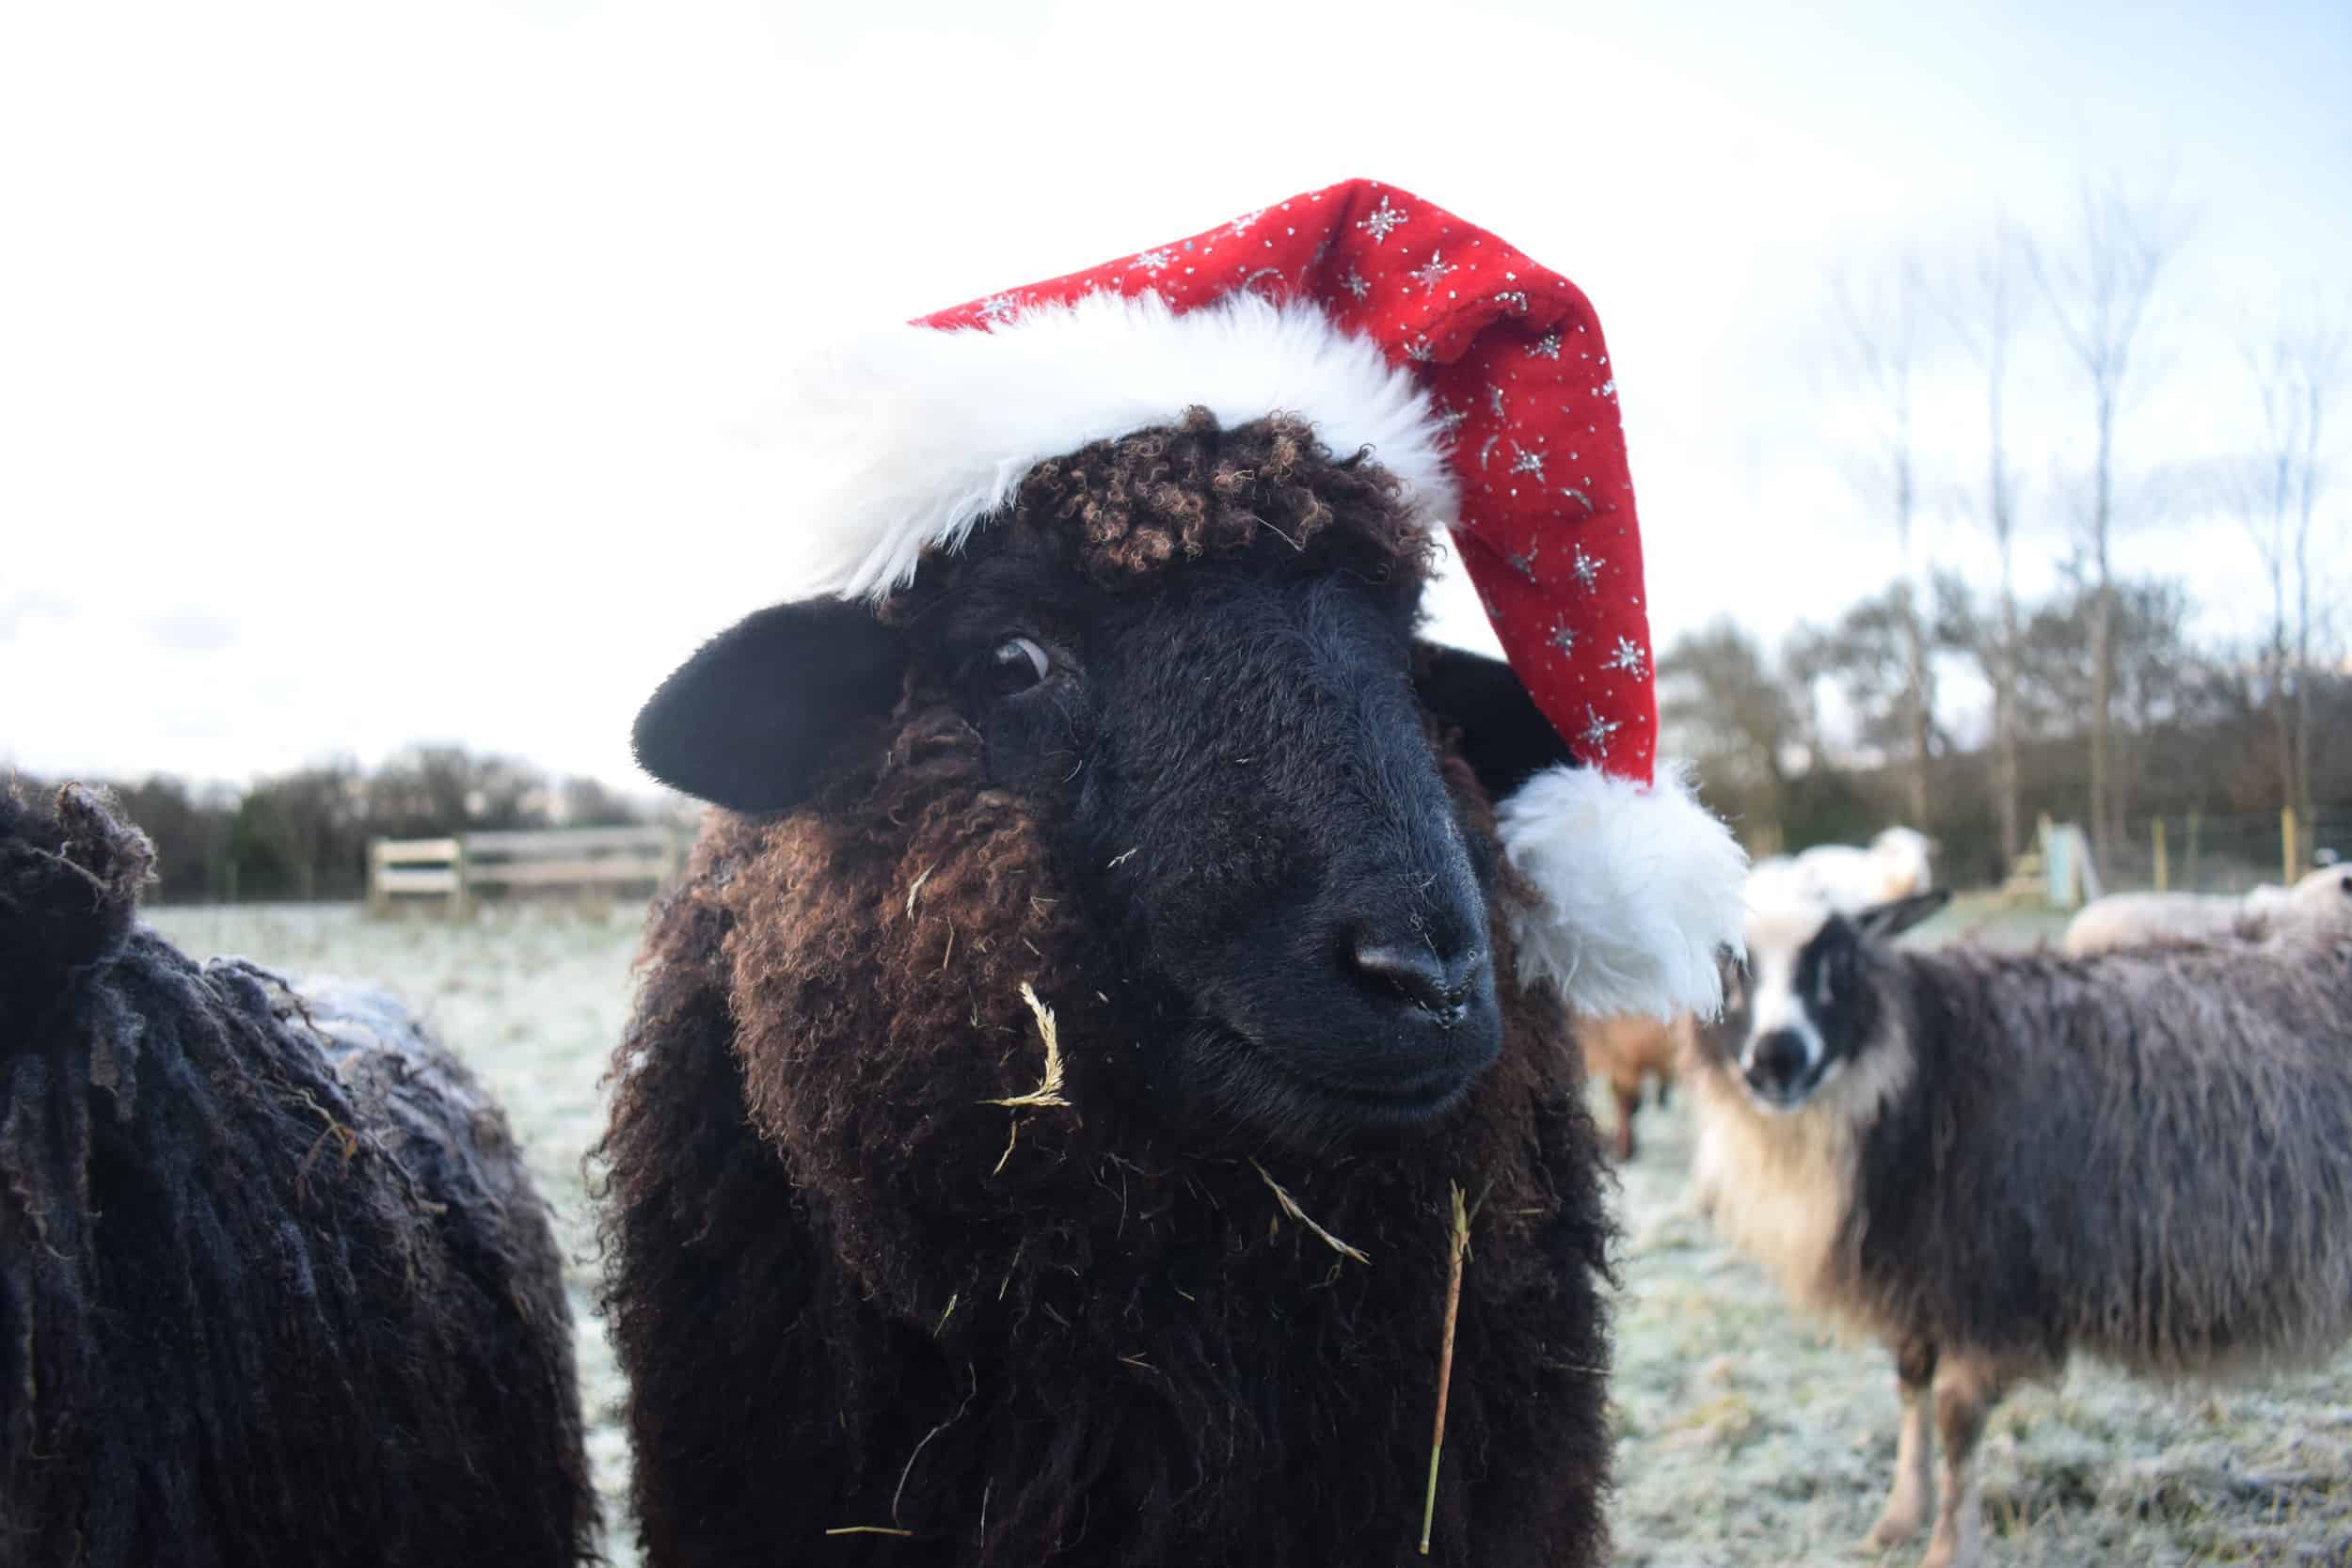 Spot santa hat xmas valais blacknose cross zwables texel sheep pet sheep ethical sustainable wool gifts patchwork sheep black 2